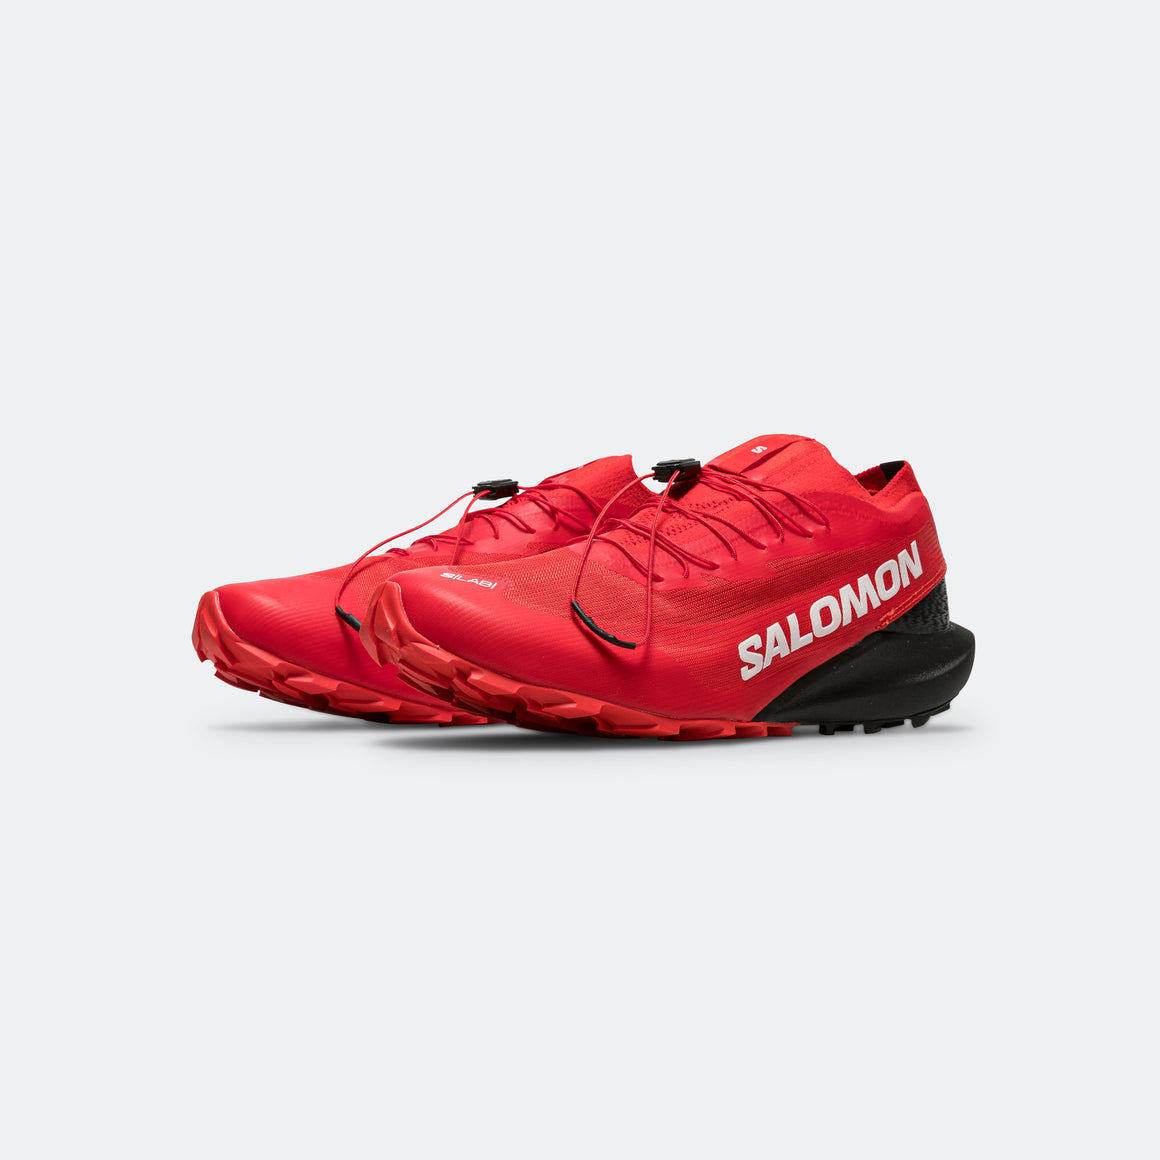 Salomon - Mens S/Lab Pulsar 3 - Fiery Red/Black - Up There Athletics